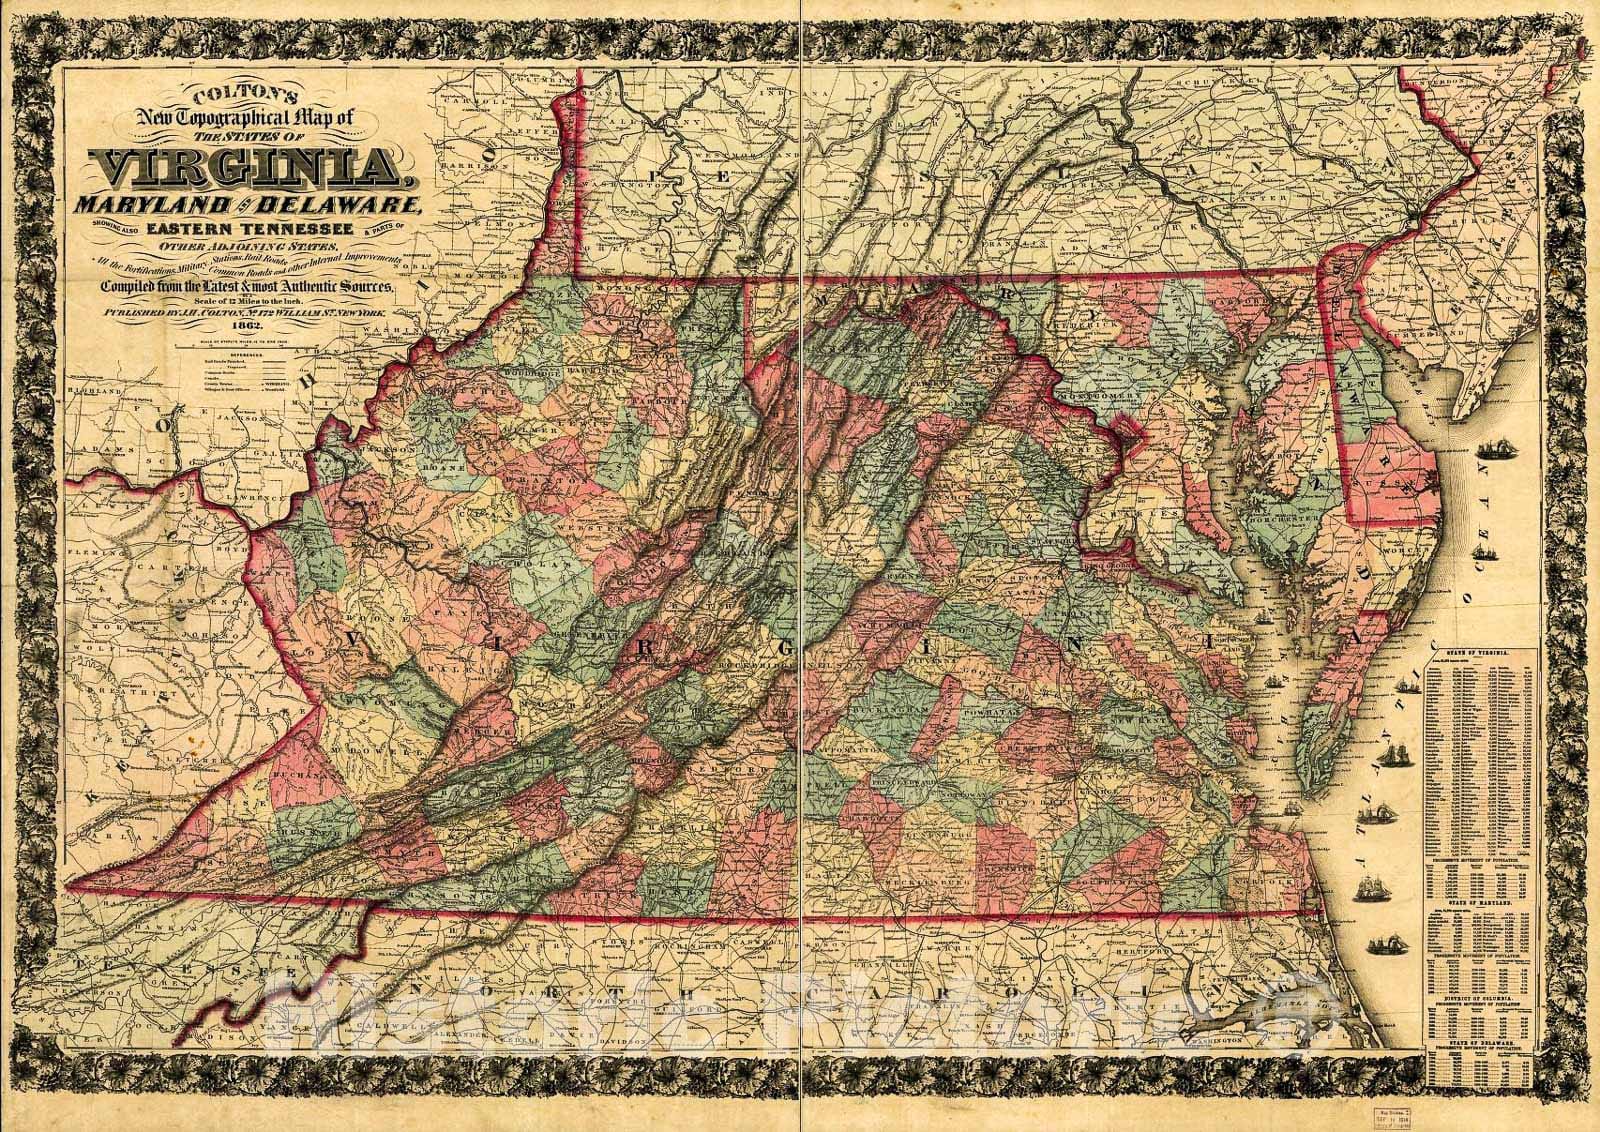 Historic 1862 Map - Colton's New Topographical map of The States of Virginia, Maryland & Delaware : Showing Also Eastern Tennessee & Parts of All The fortifications